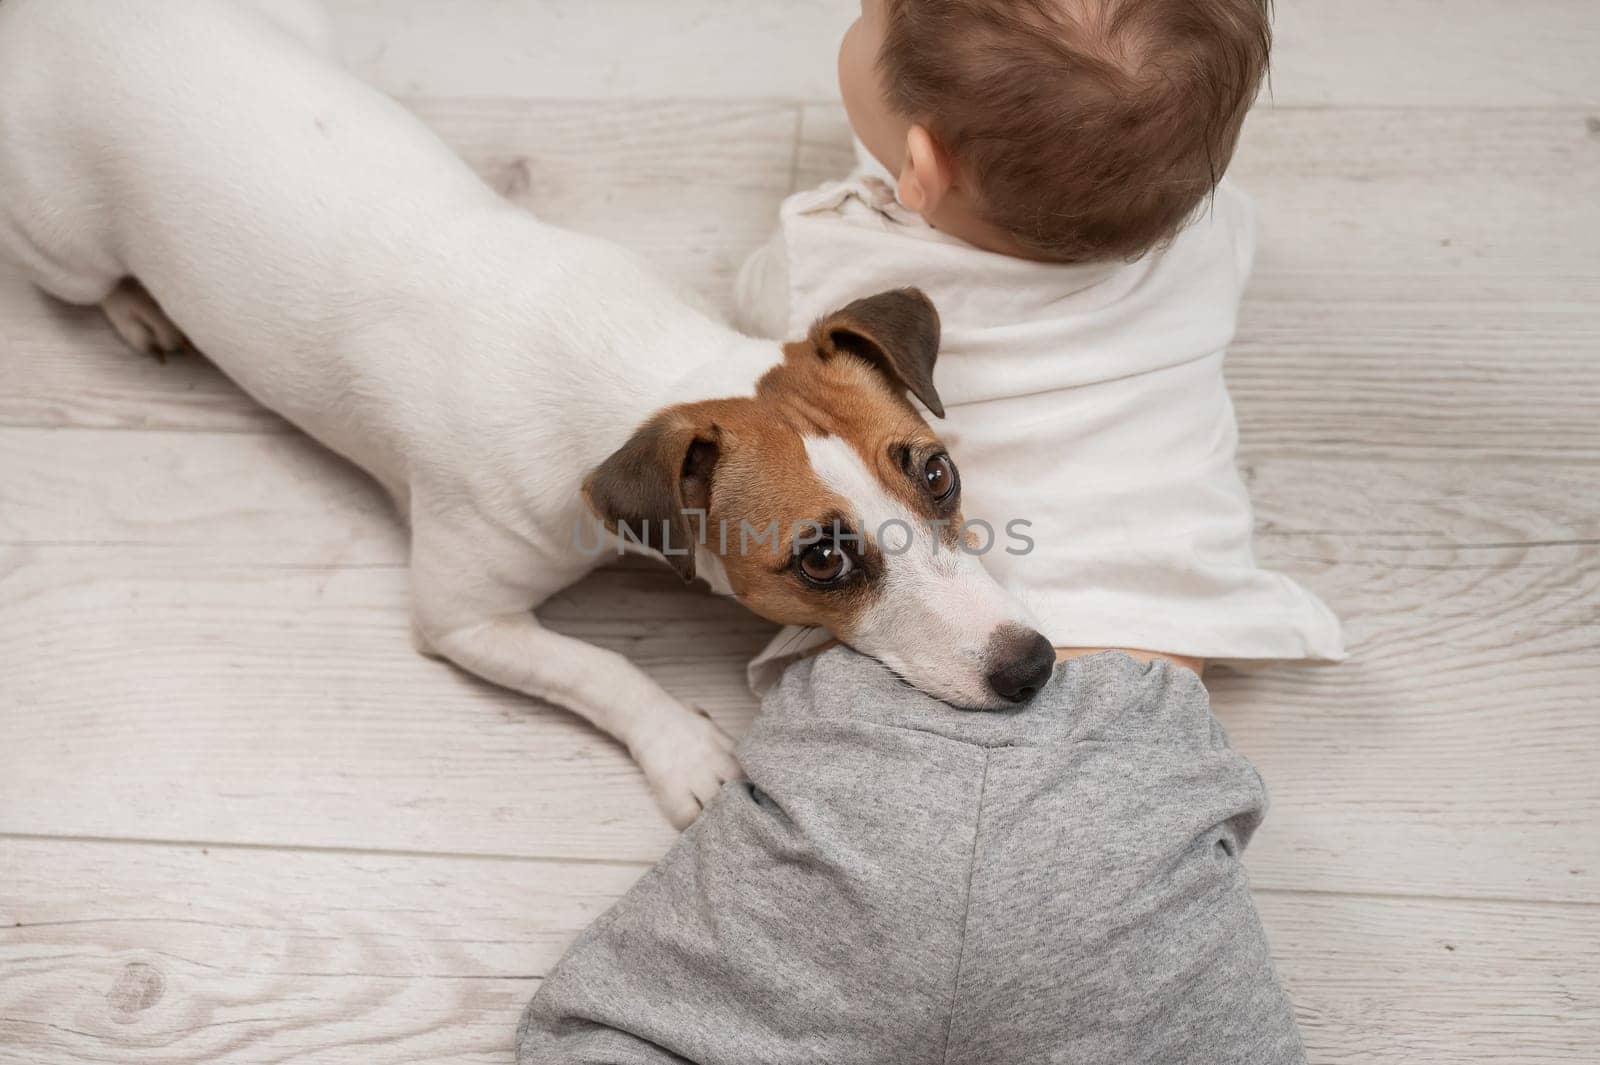 Cute baby boy and Jack Russell terrier dog lying in an embrace on a white background. by mrwed54